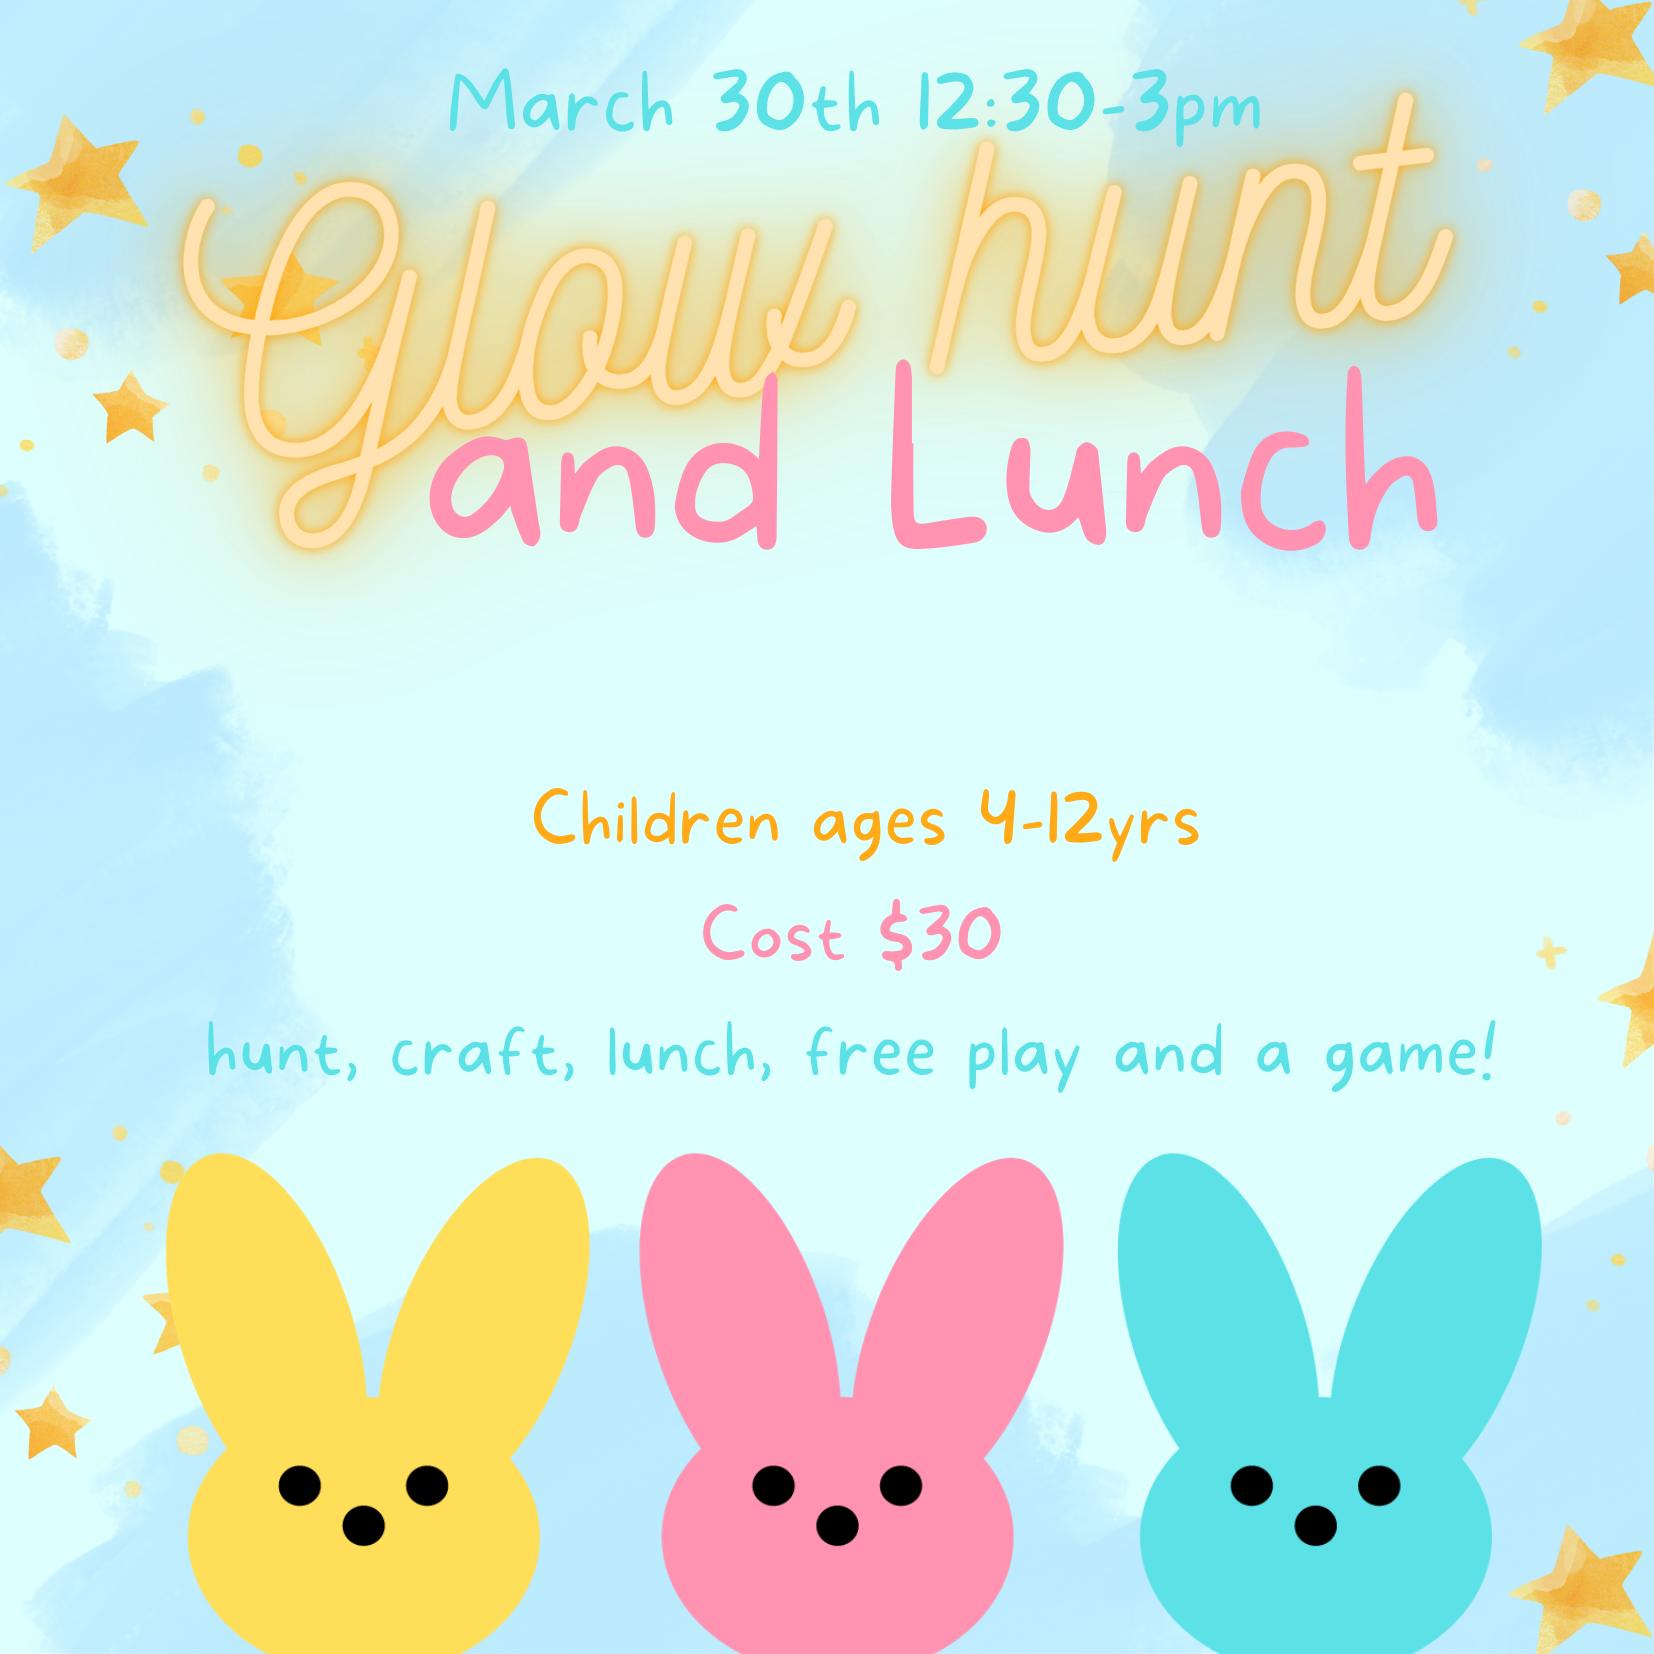 Glow hunt and lunch